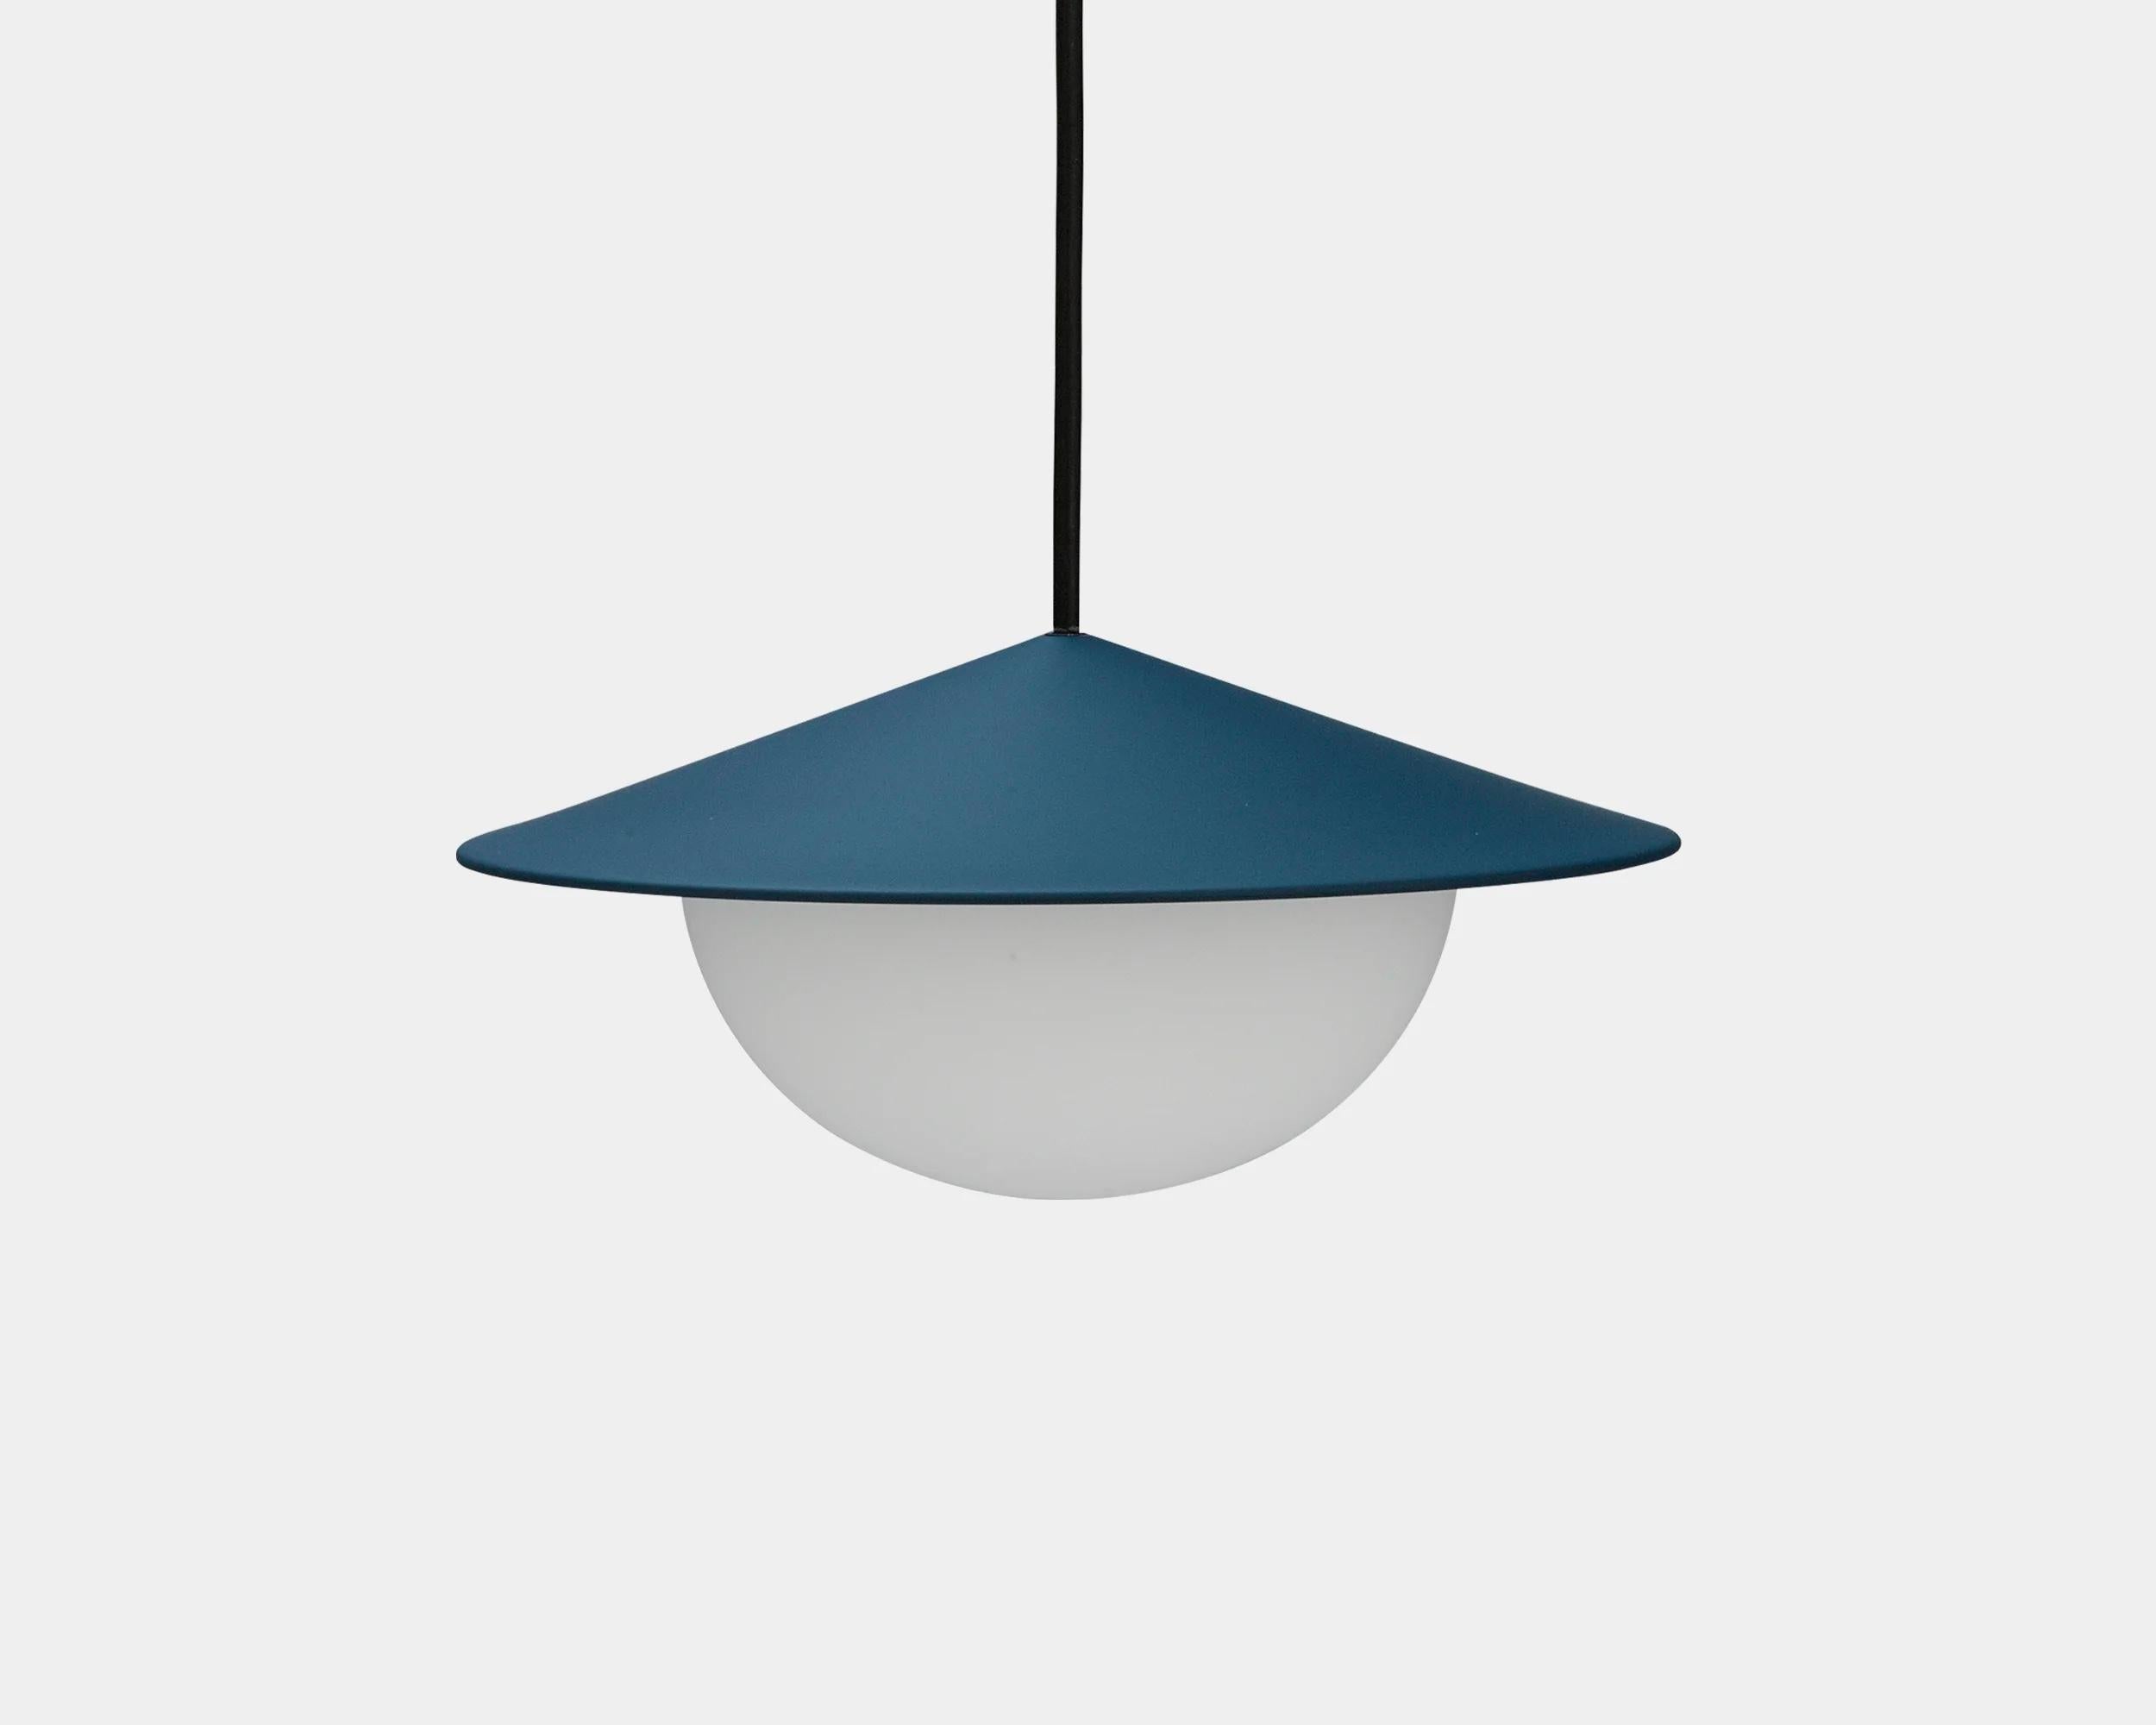 Alley pendant lamp by AGO lighting
UL Listed

Painted aluminum, white opal glass
LED G9 110-240V (not included)

Available colors:
Charcoal, white, grey, burgundy, green, mustard, dark blue, mud grey, brick red

Dimensions:
15,8 x 34 cm (Large)
11 x